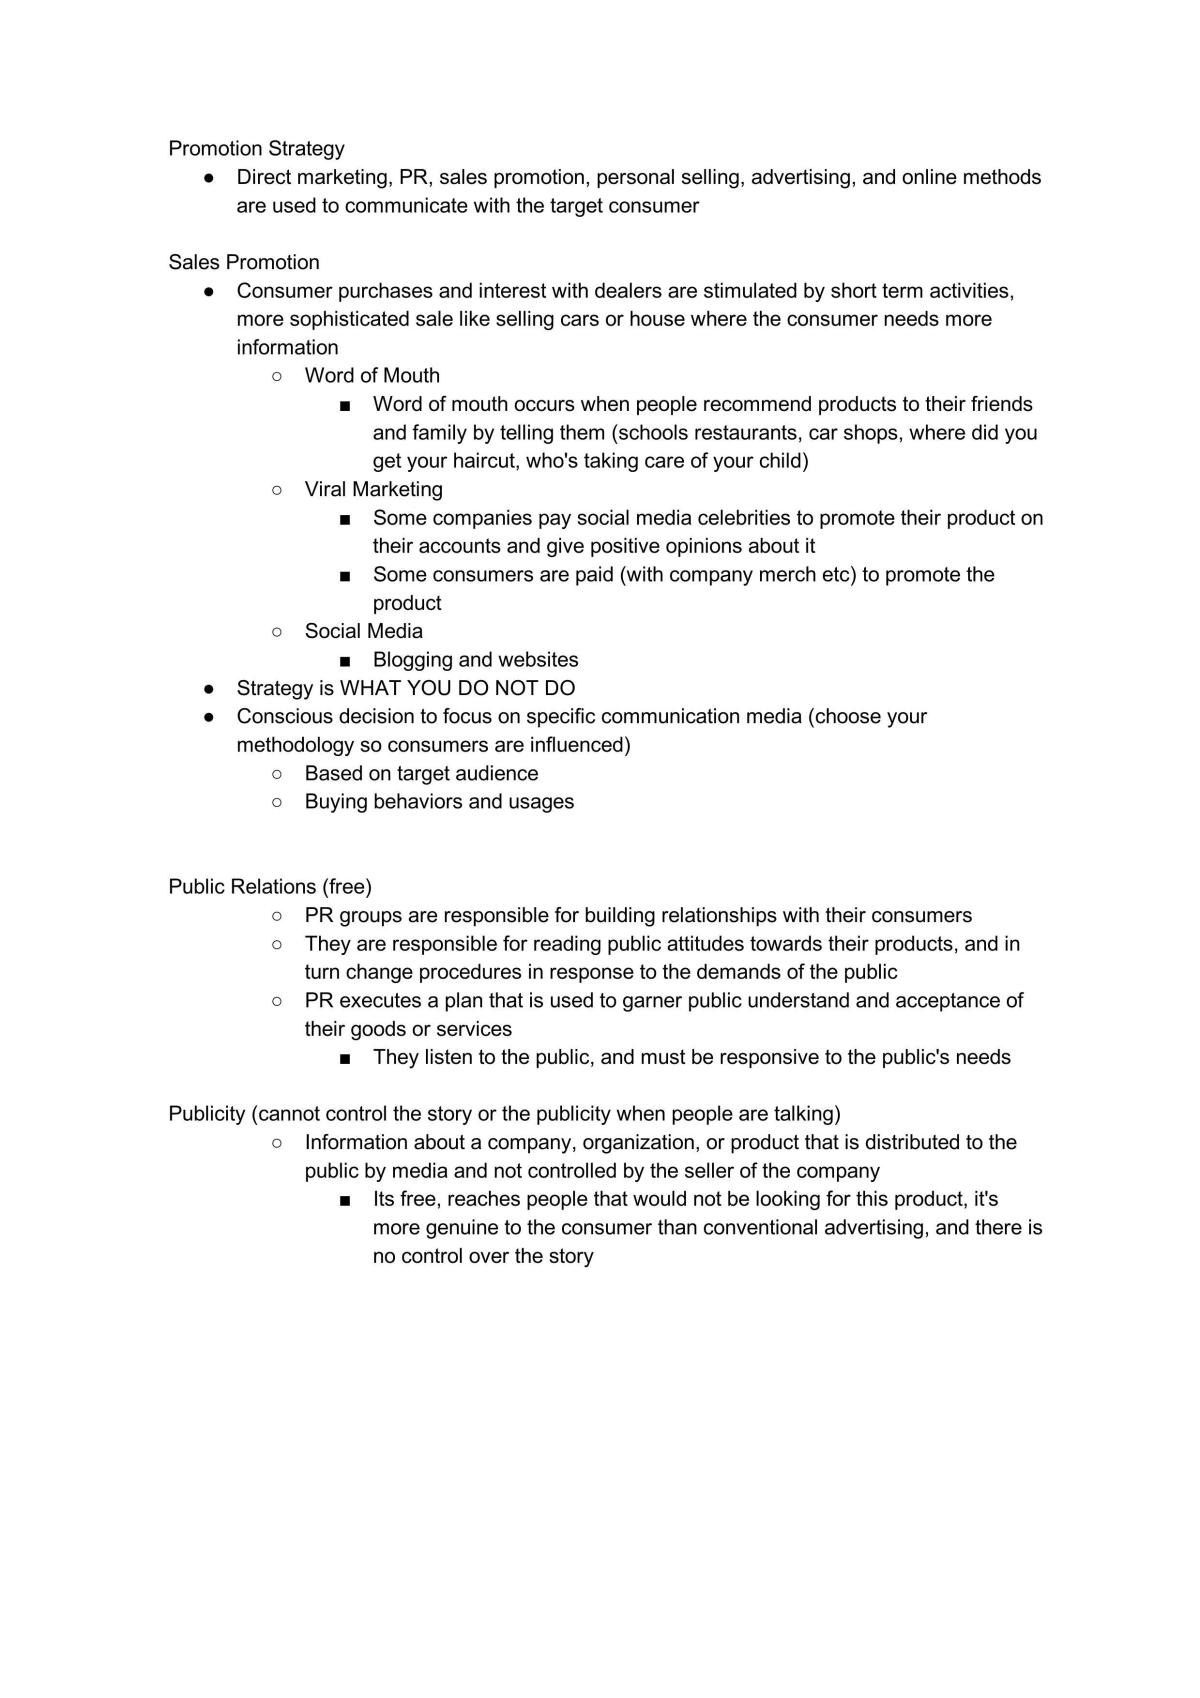 Business, Society and Ethics Final Review - Page 24